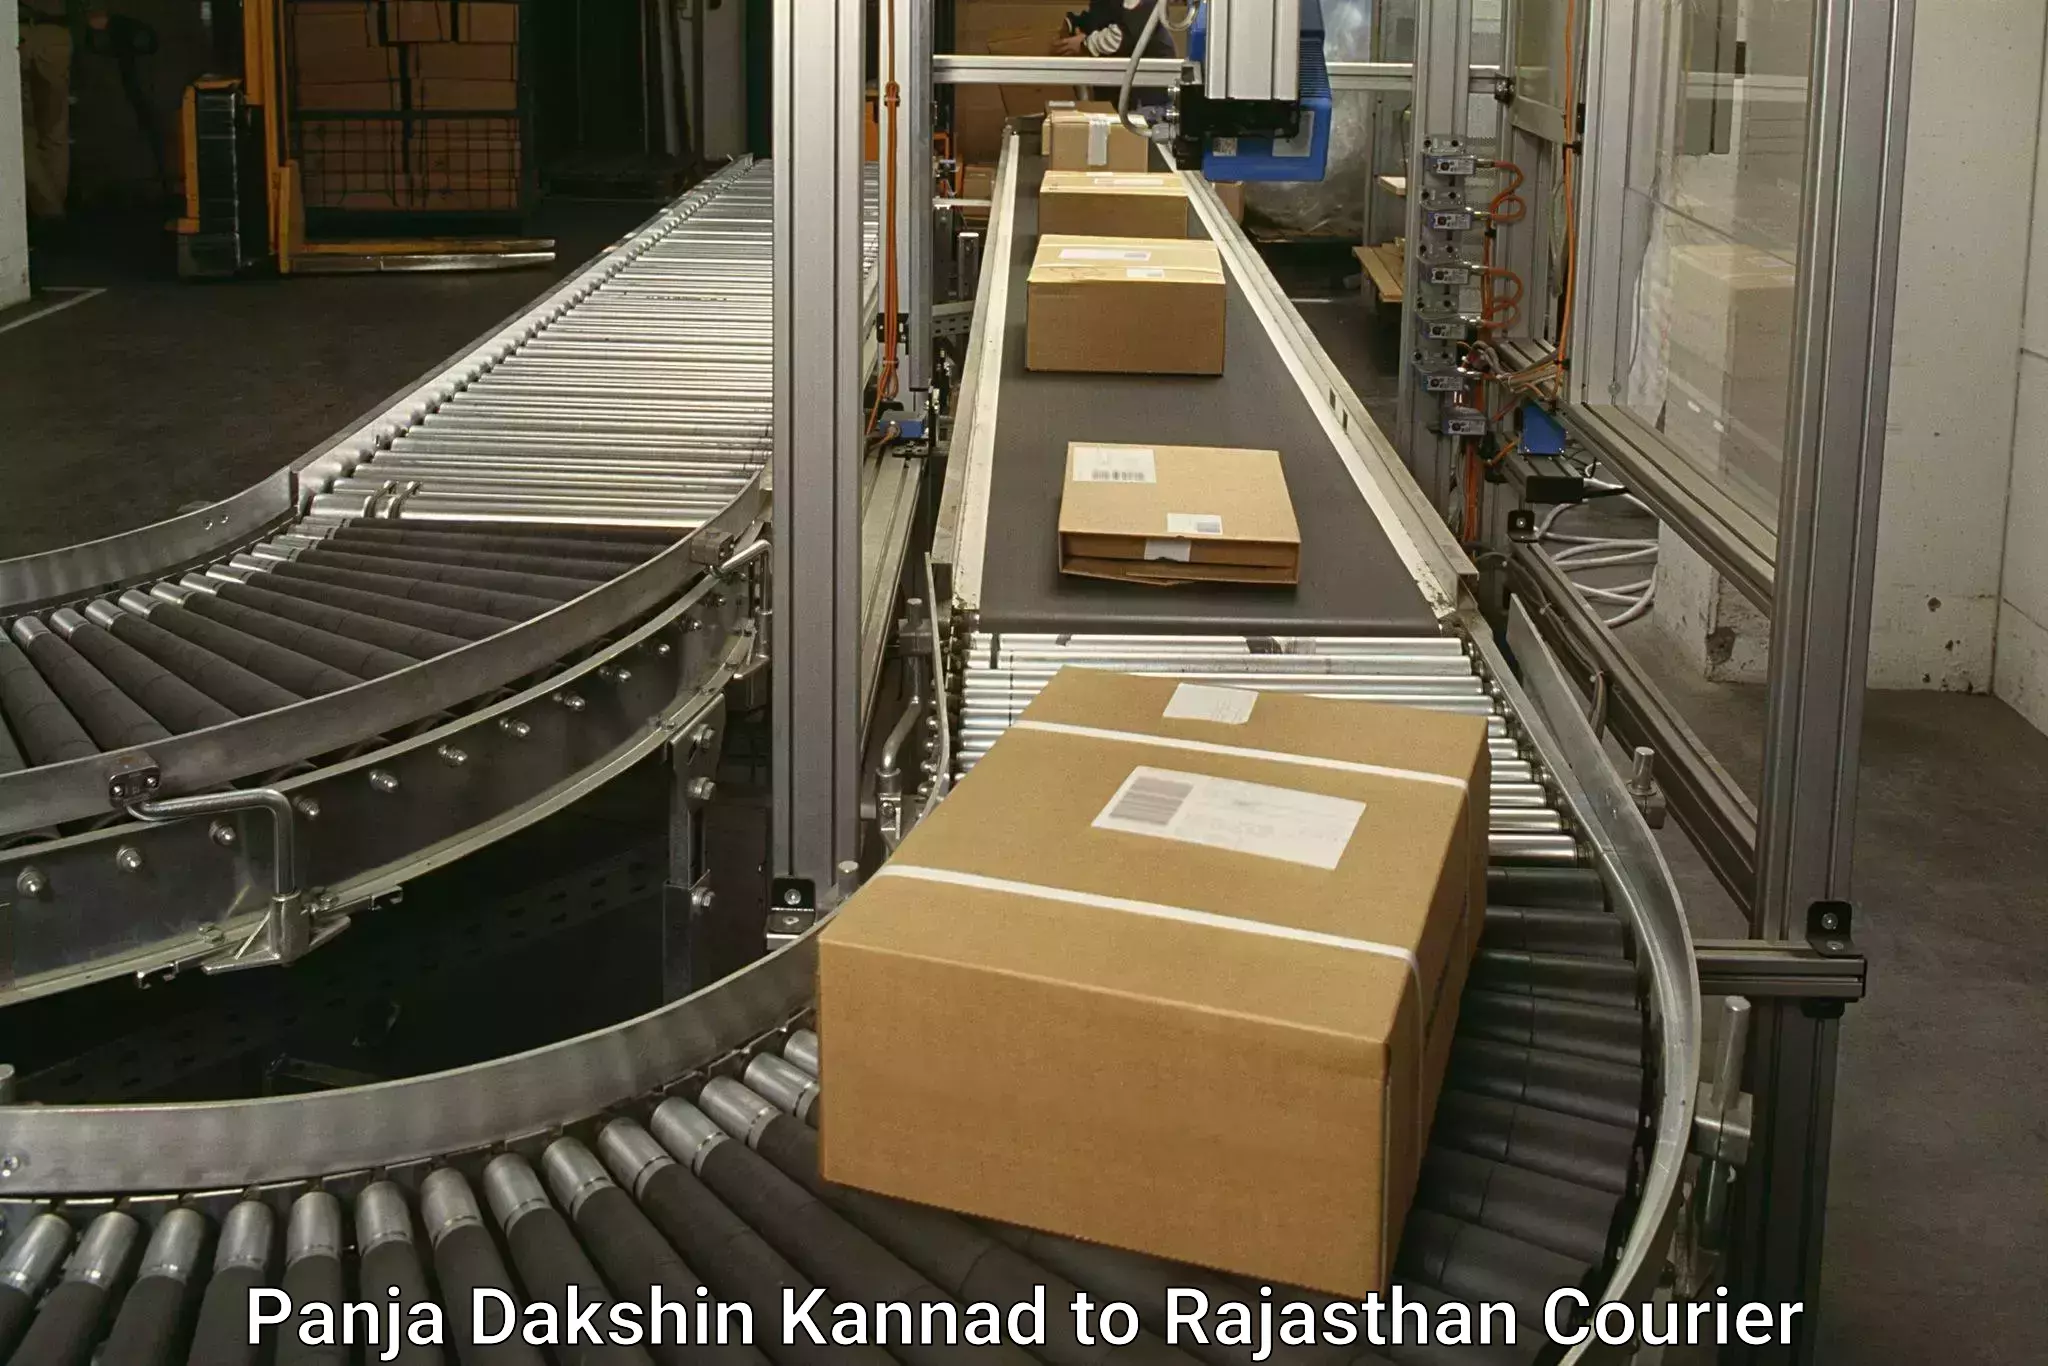 Easy access courier services in Panja Dakshin Kannad to Fatehpur Sikar